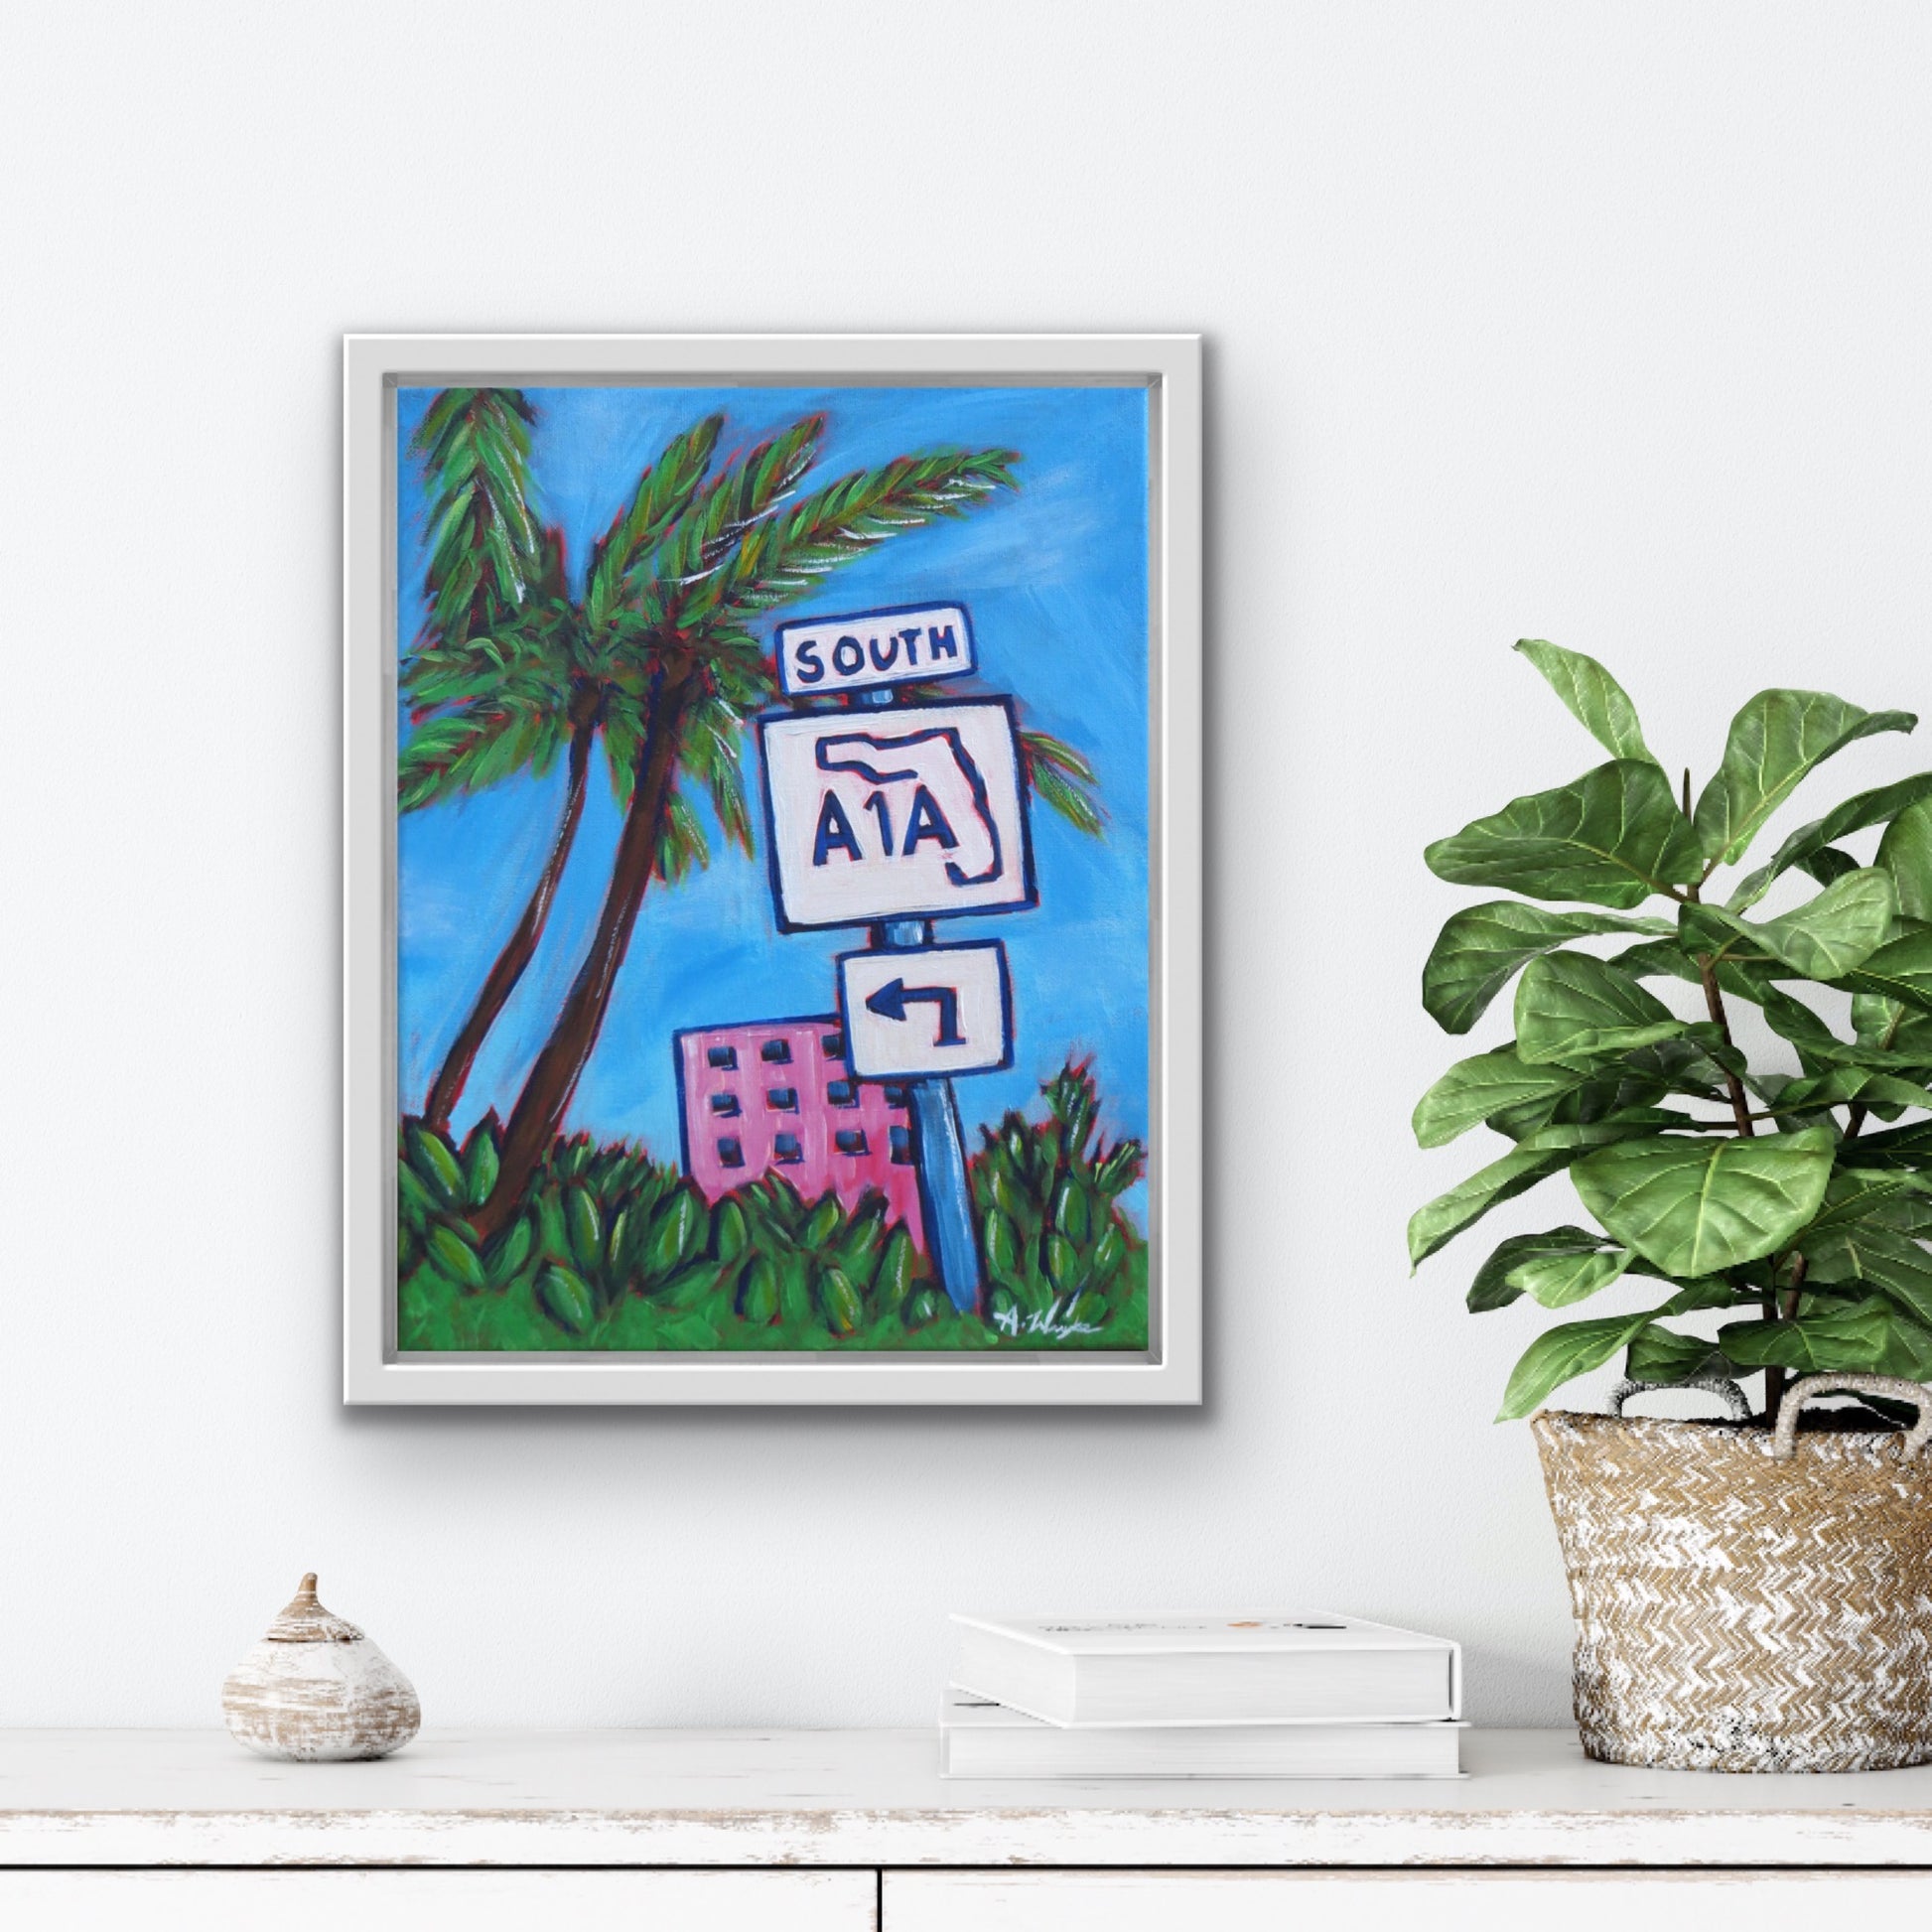 Boston Travel Artist Alexandra Wuyke Art painting "a1a" hangs over a desk in house.